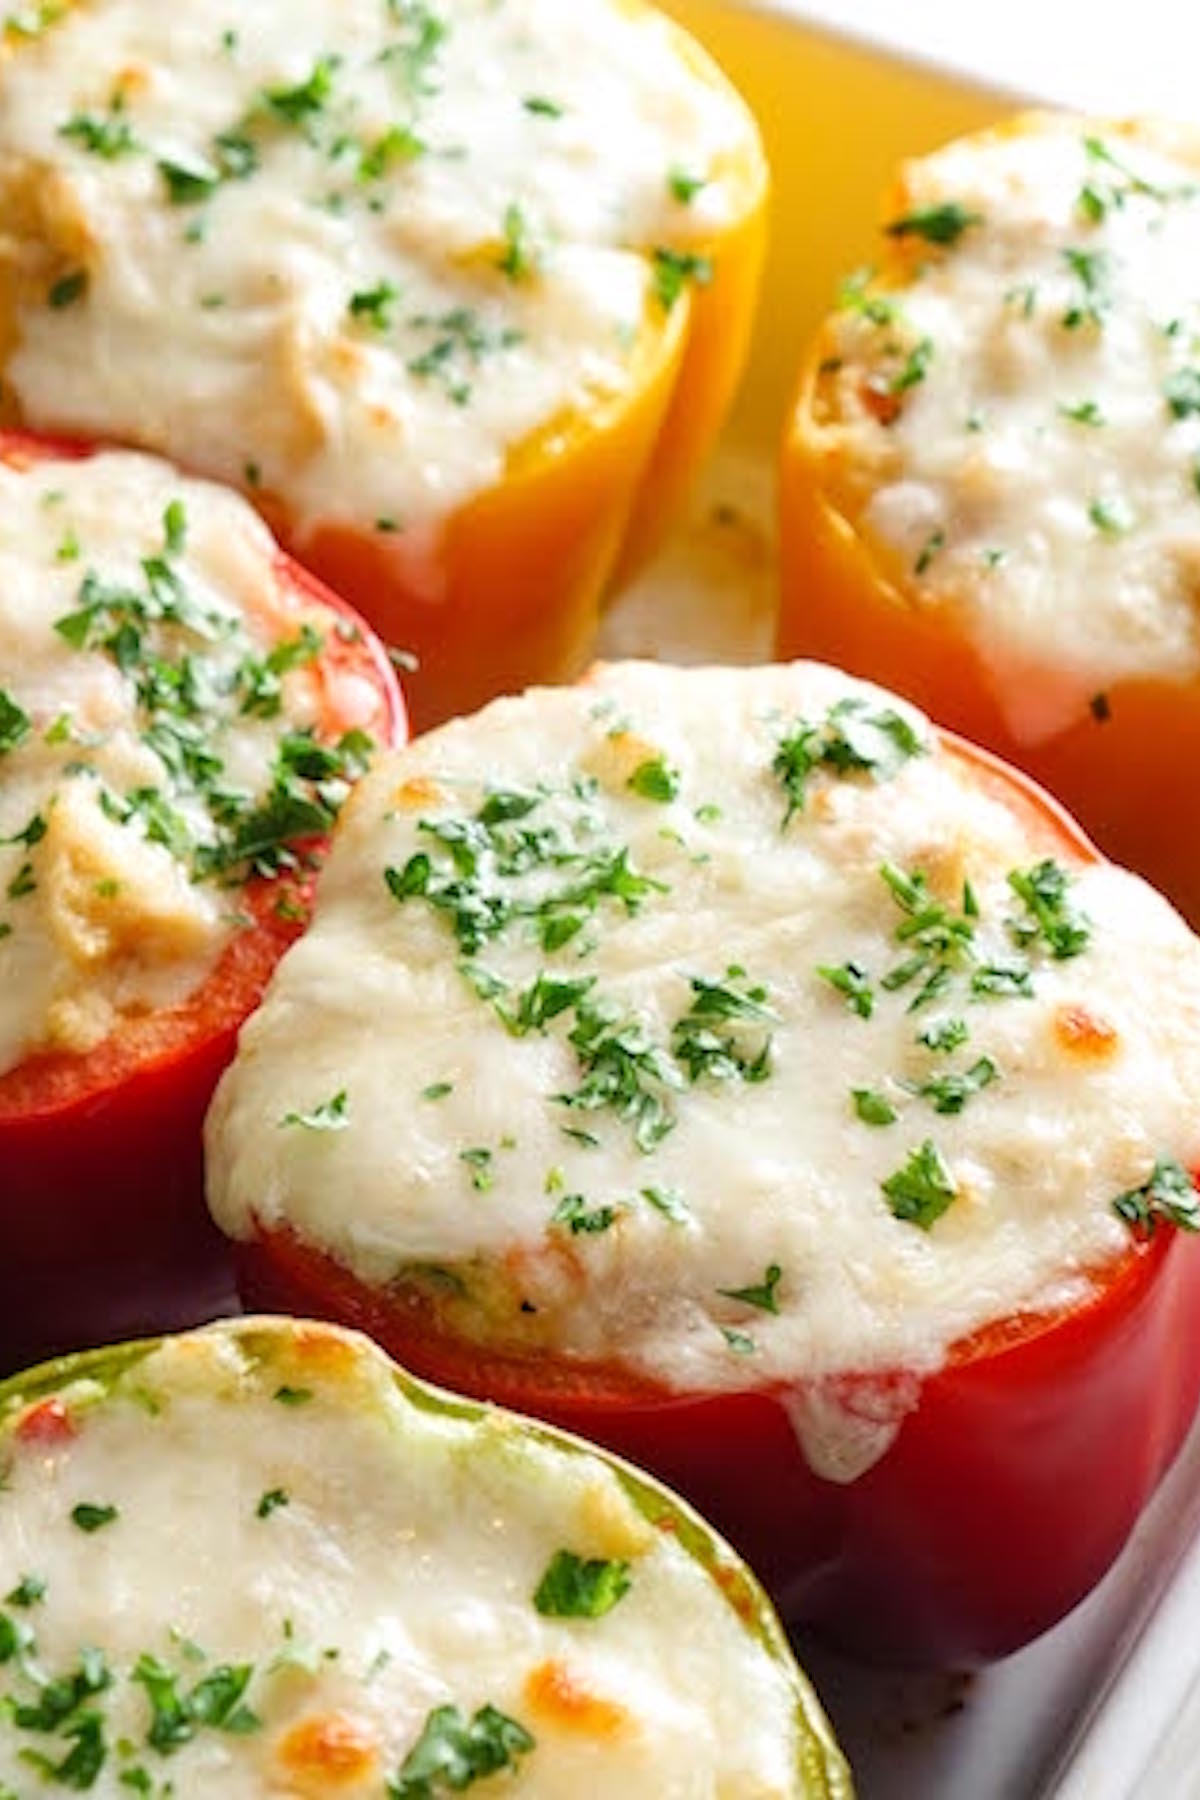 If you’re looking for satisfying low-carb dinner ideas, these keto Stuffed Peppers without Rice are just what you need. They don’t include rice so are much lower in carbs than traditional stuffed peppers.